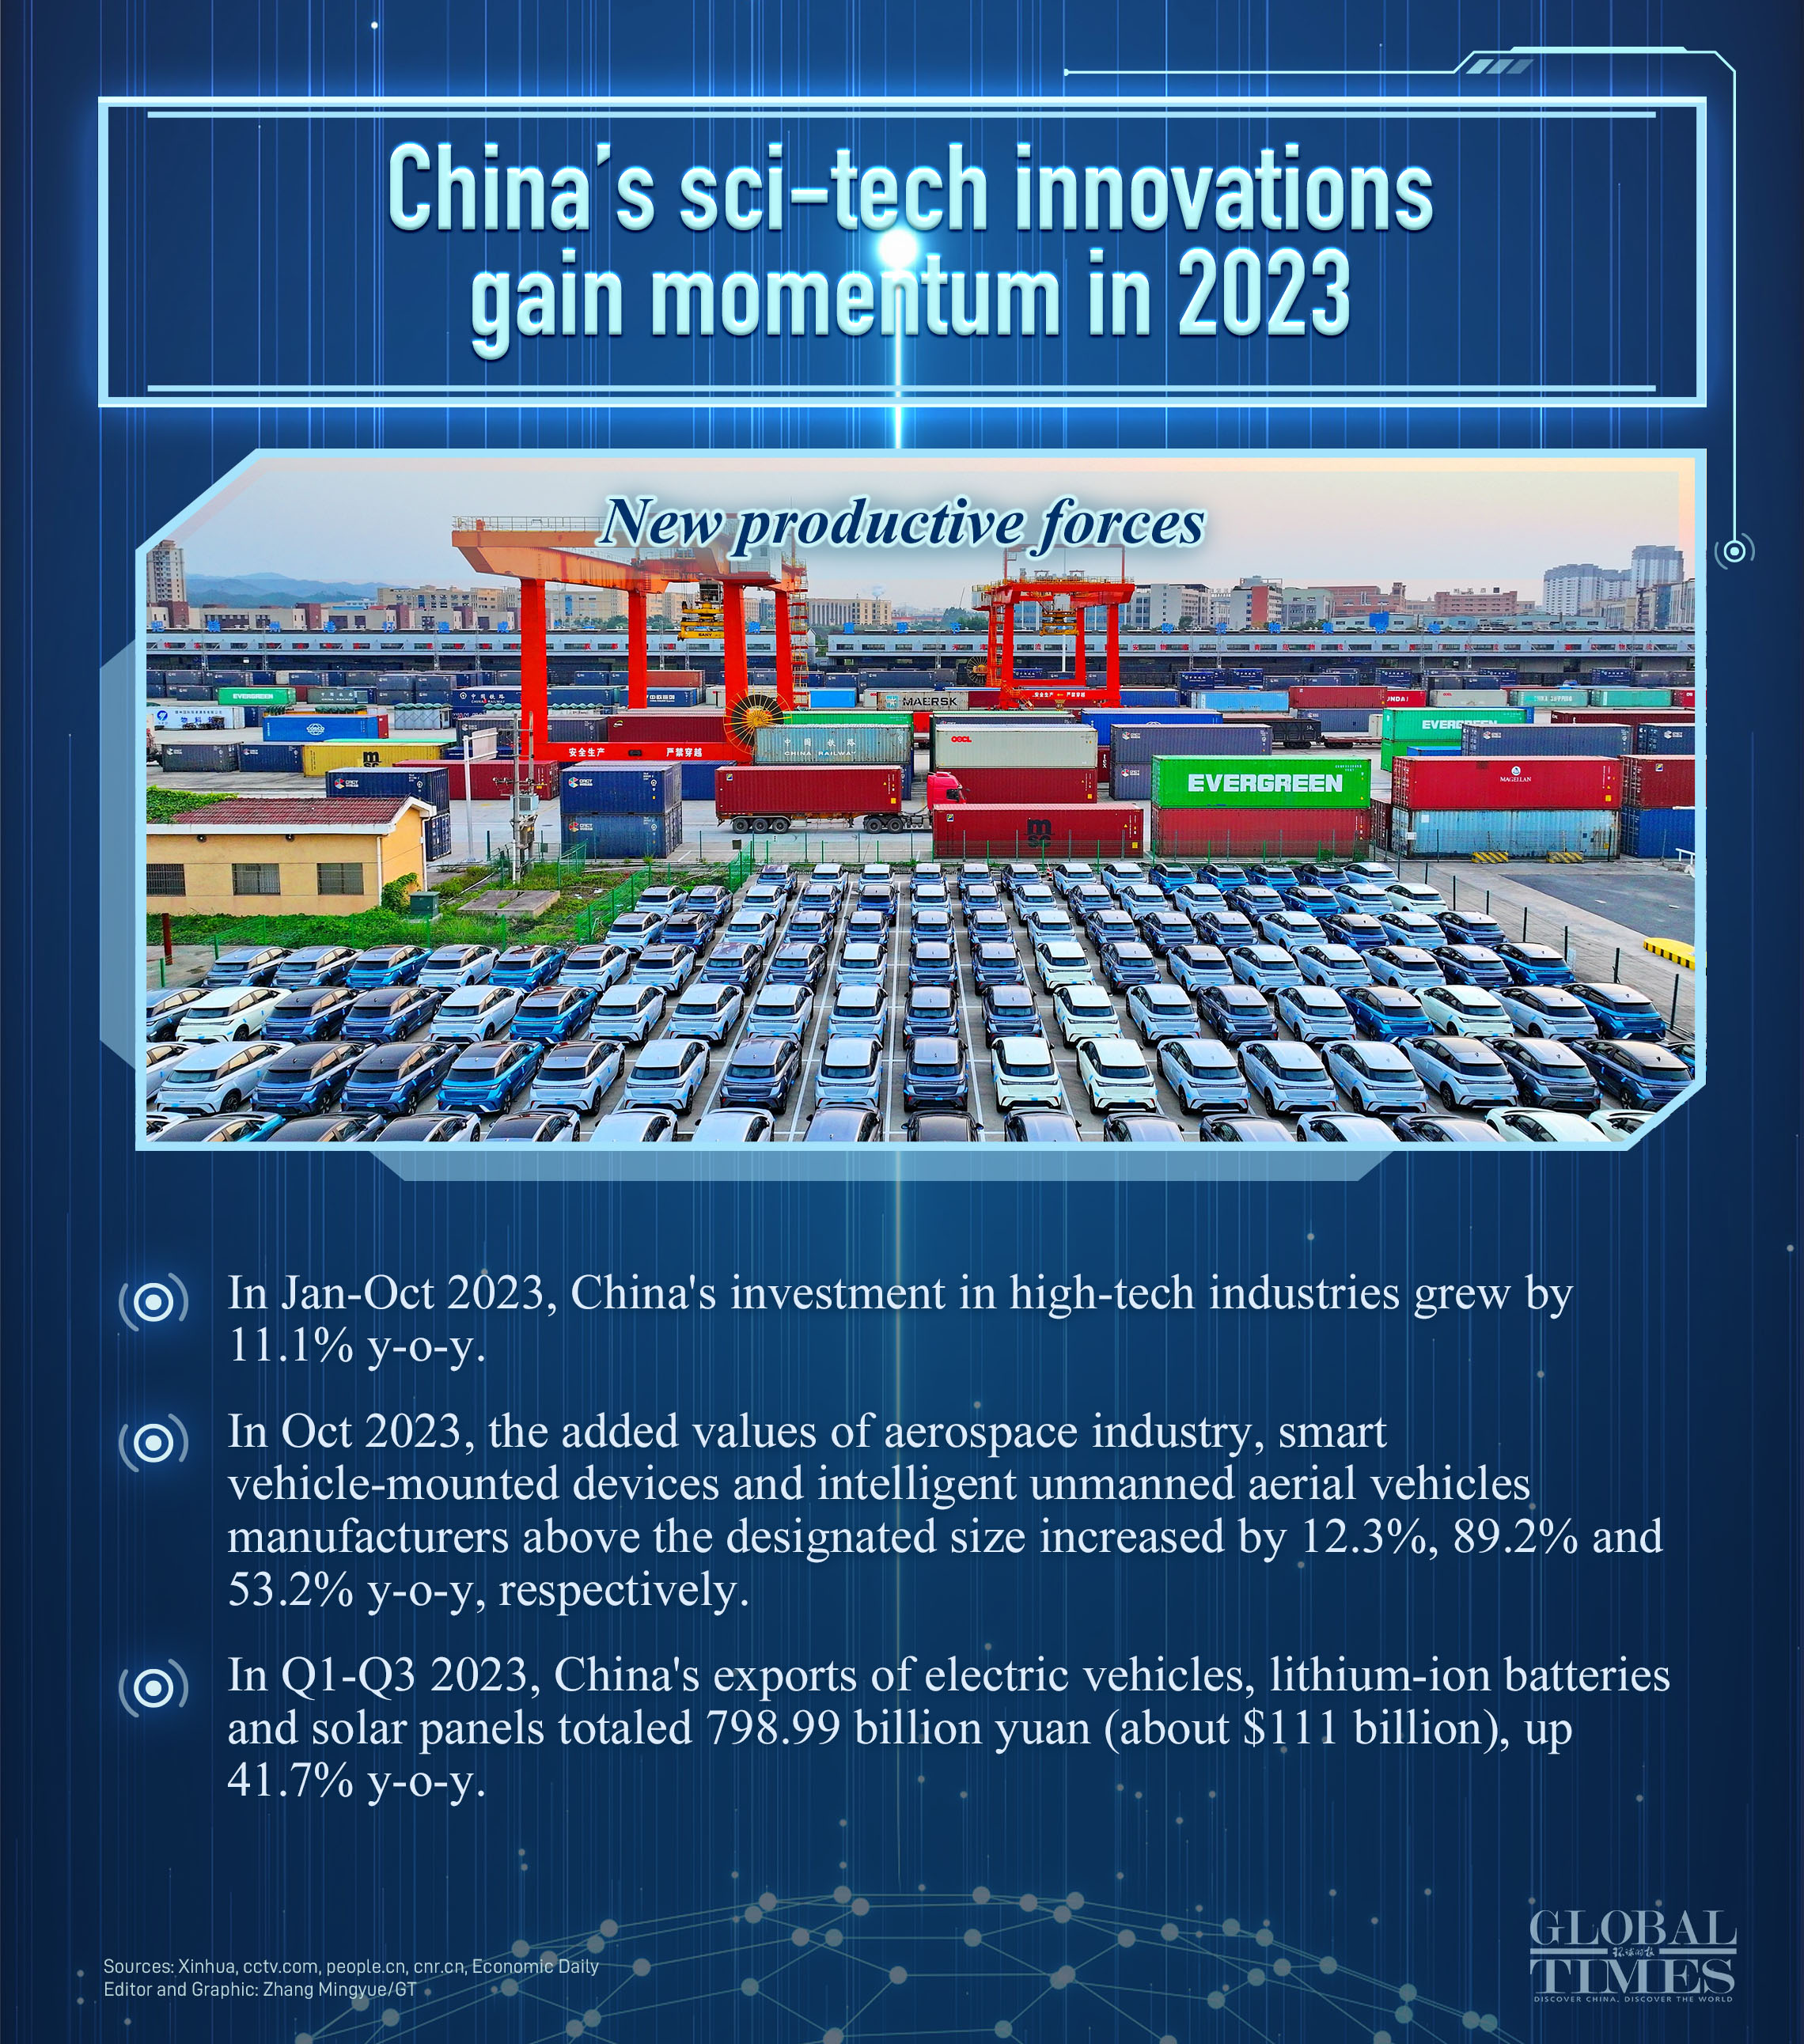 China’s sci-tech innovations gain momentum in 2023